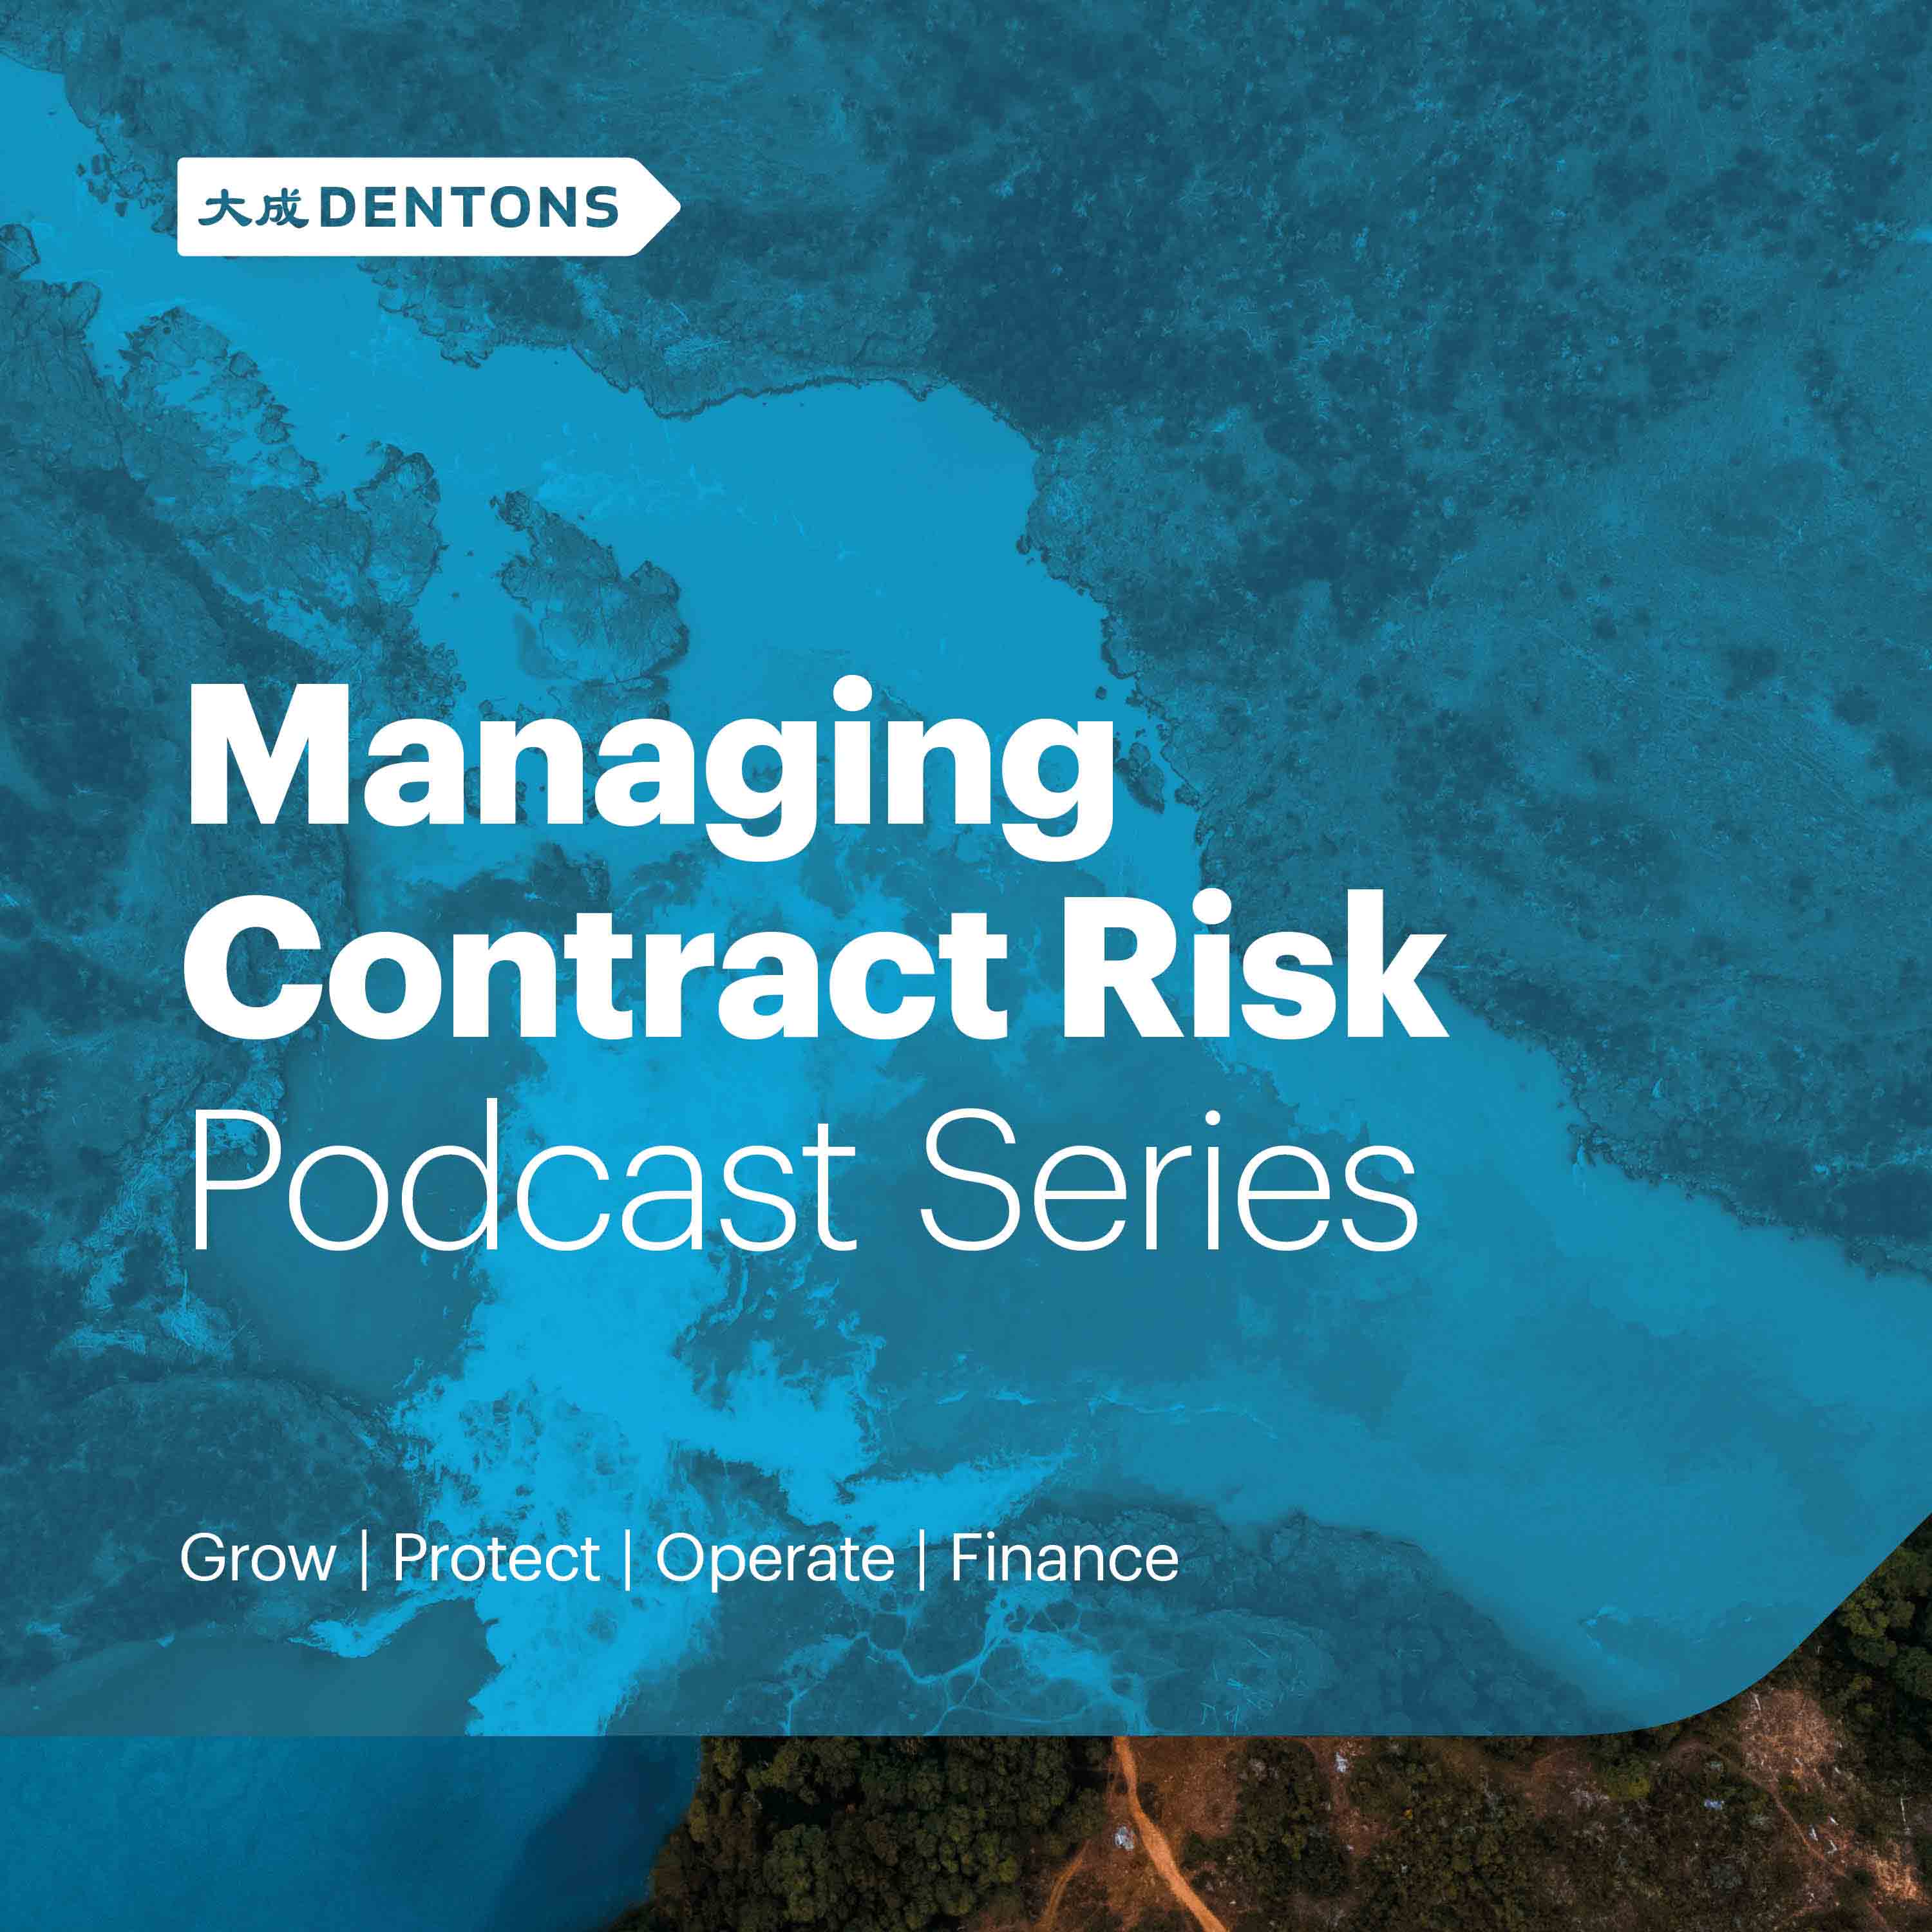 Disputes teams contract risk initiative podcast thumbnail